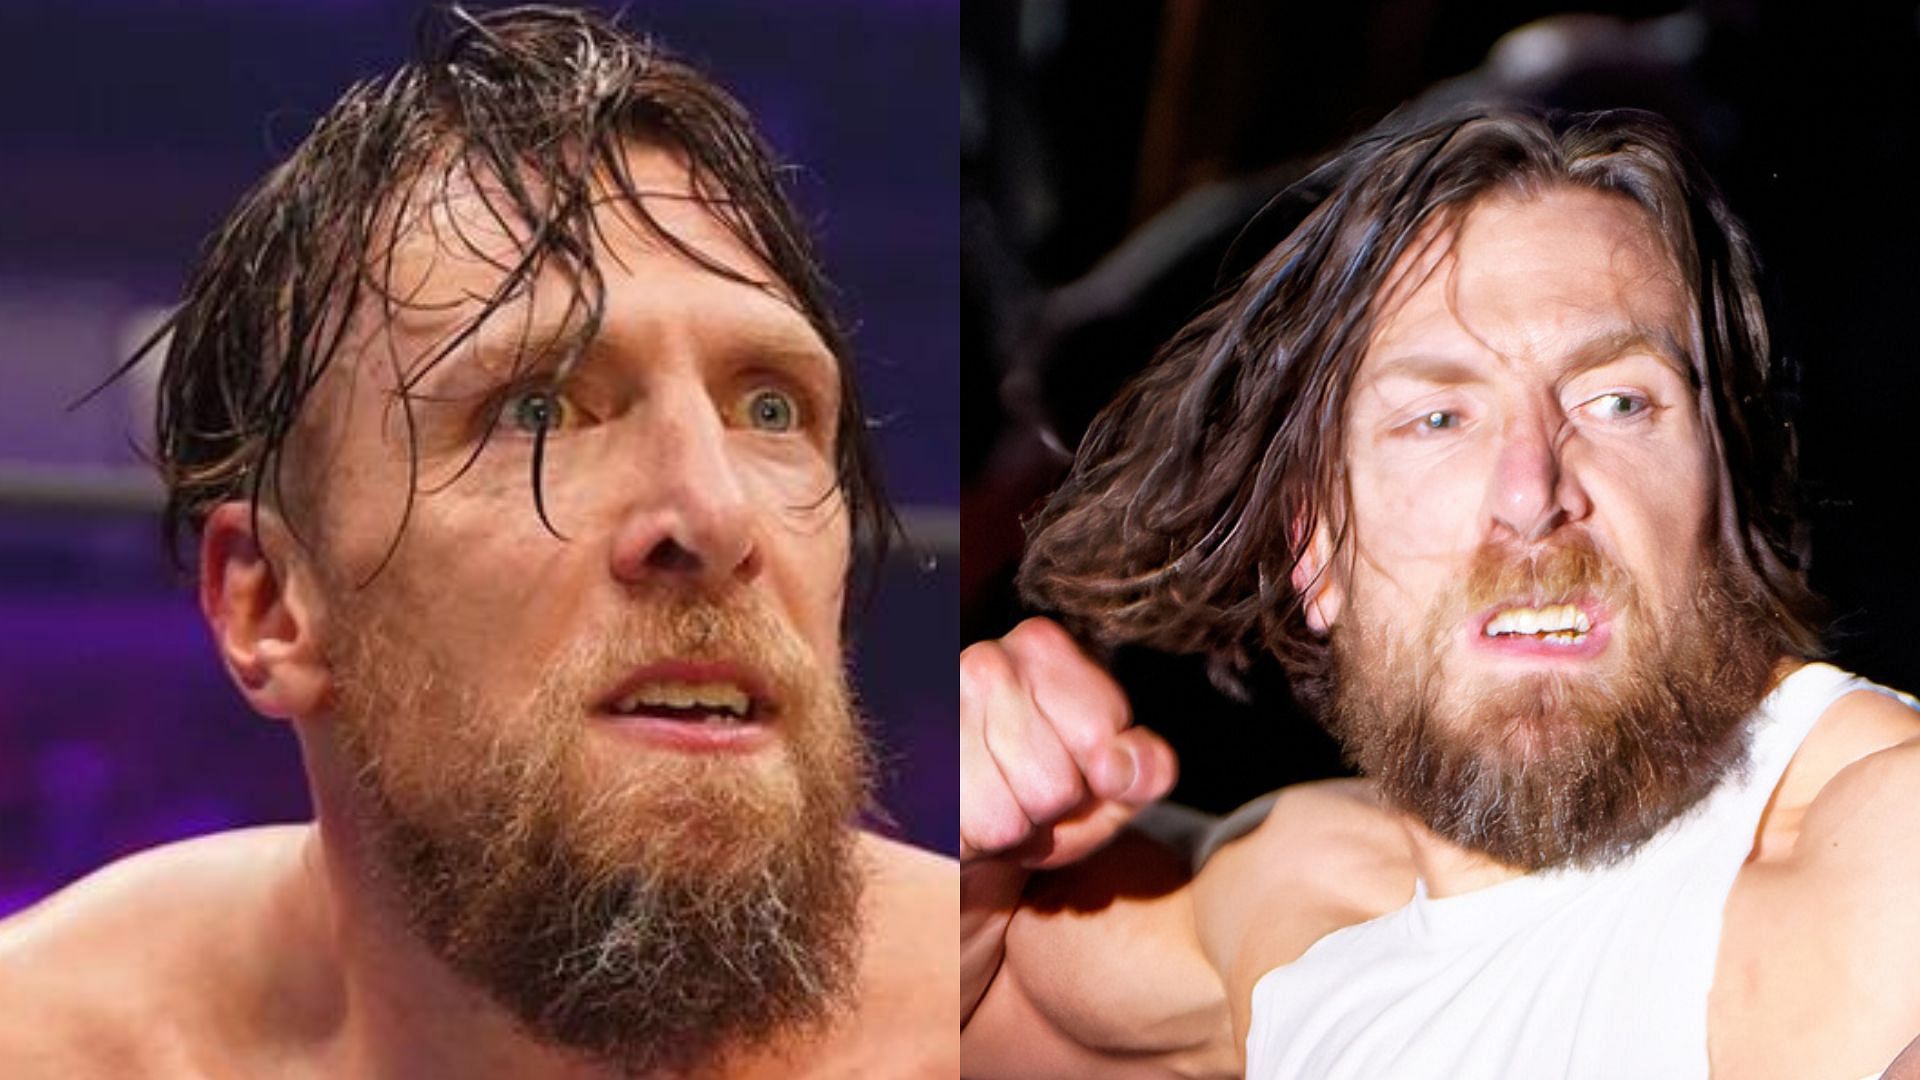 Has Bryan Danielson been booked properly in AEW?